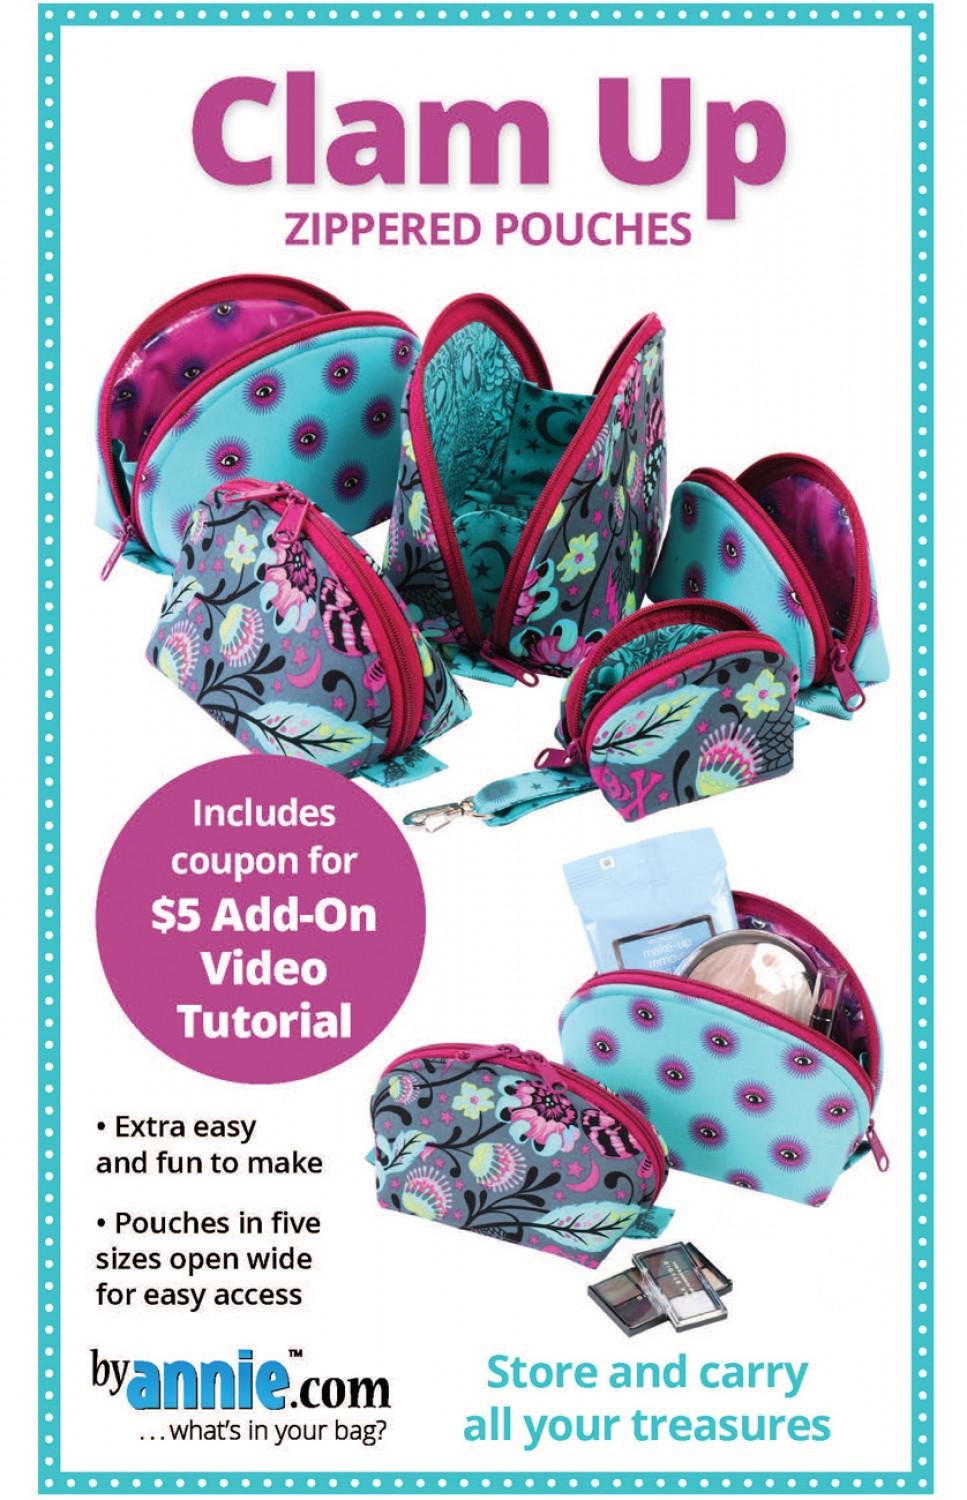 Clam Up Zippered Pouches Sewing Pattern by Annie Unrein for Patterns by Annie